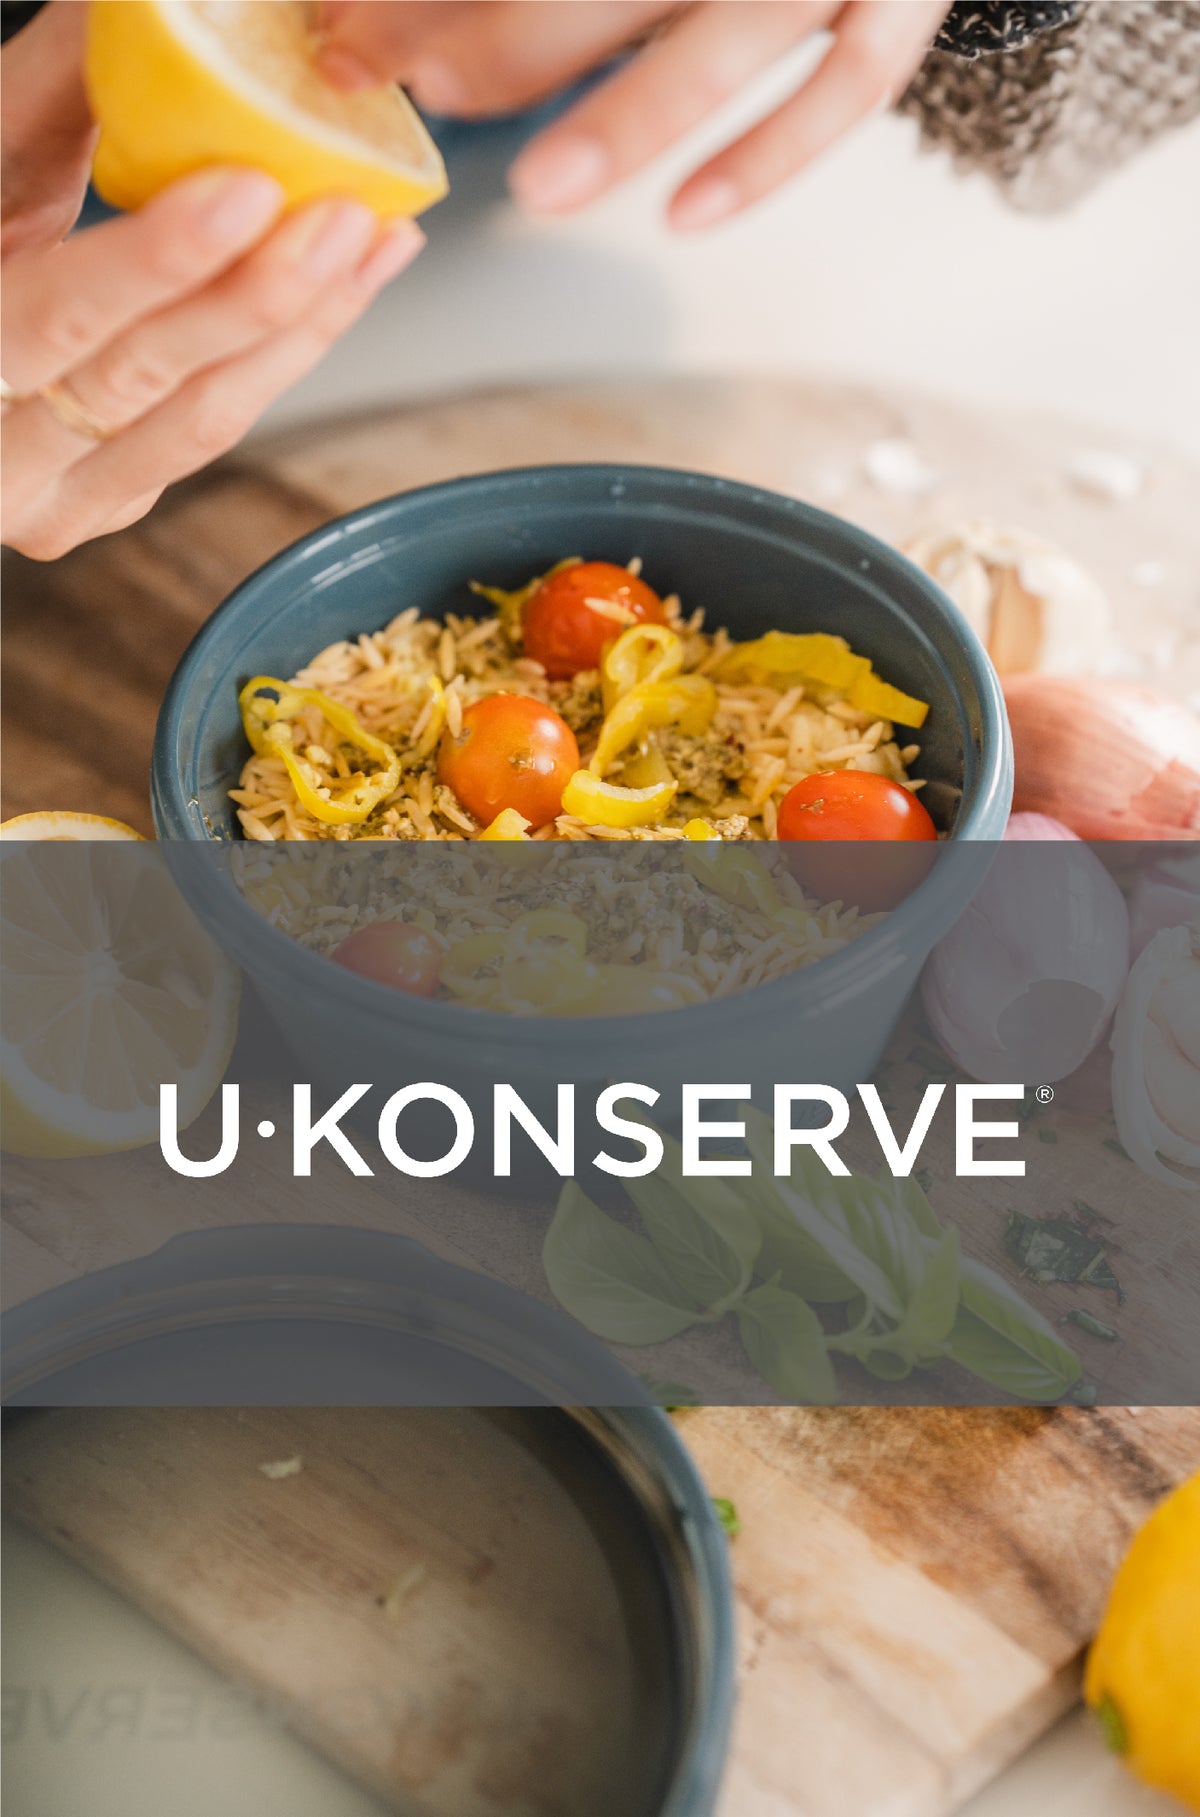 U-Konserve container and logo